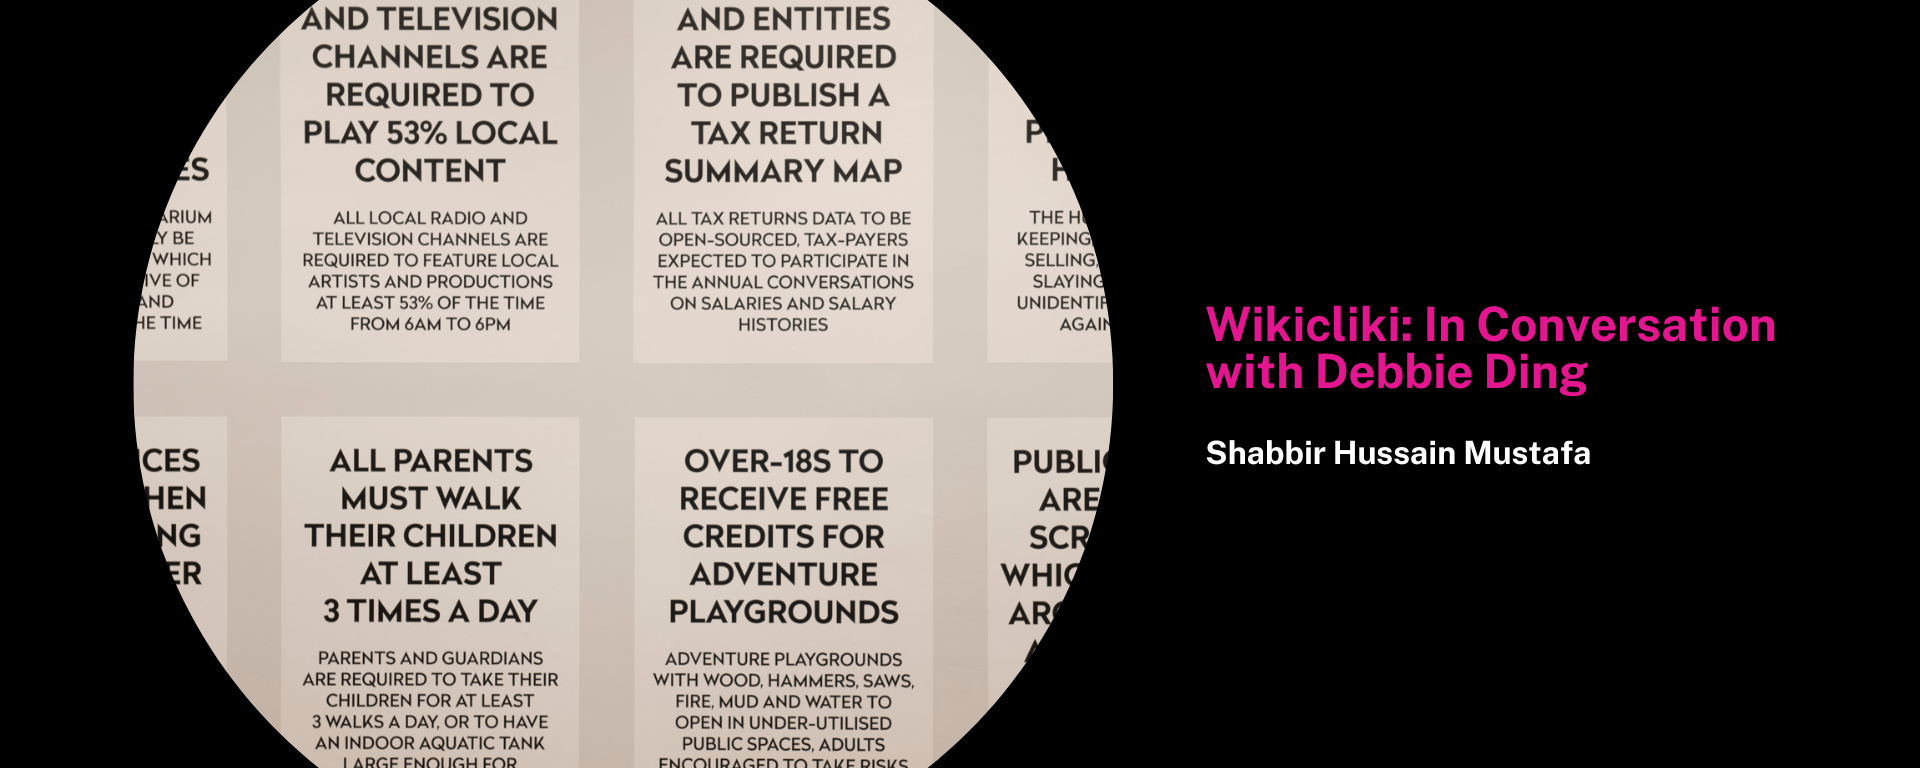 Wikicliki: In Conversation with Debbie Ding